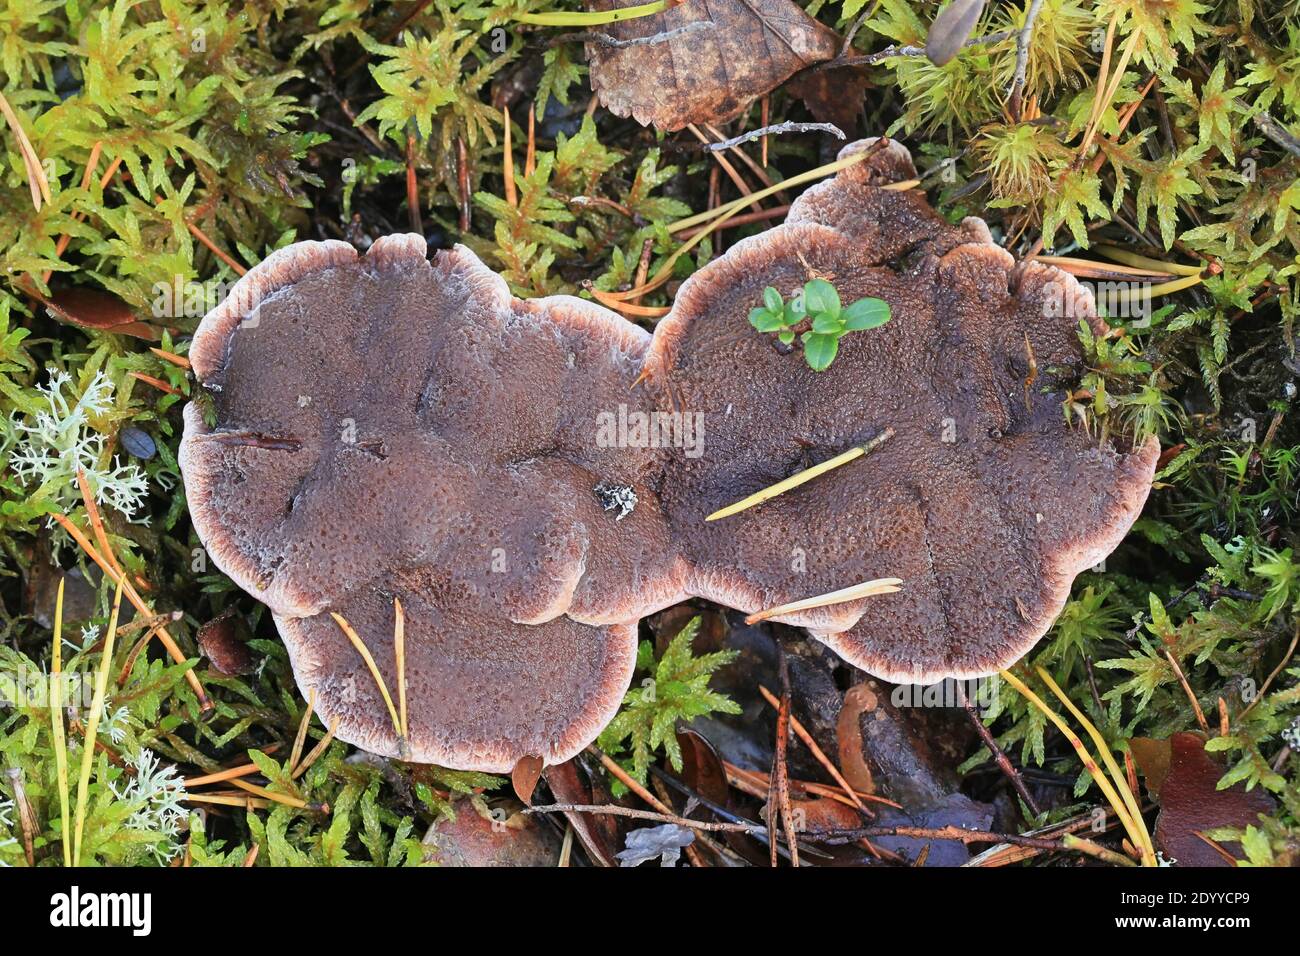 Hydnellum ferrugineum, known as the mealy tooth or the reddish-brown corky spine fungus, wild mushroom from Finland Stock Photo